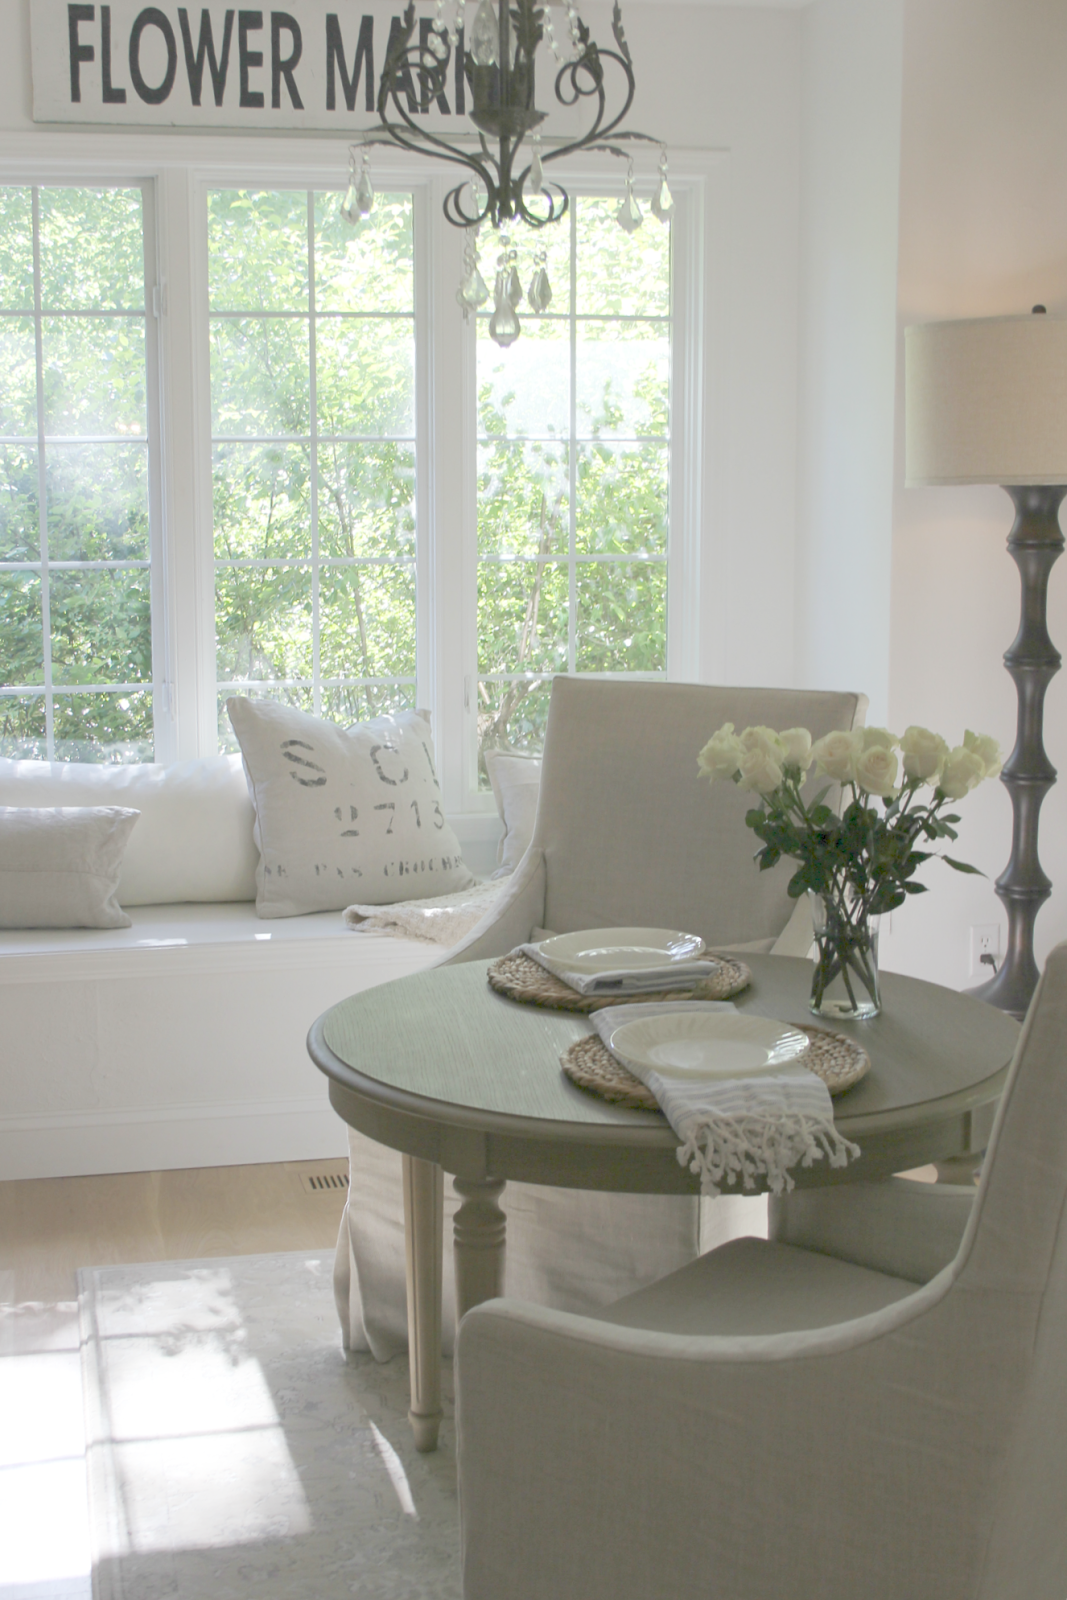 Serene breakfast room with window seat, round dining table, Belgian linen slipcovered arm chairs, and vintage Flower Market sign. #hellolovelystudio #kitchendecor #breakfastroom #windowseat #belgianlinen #vintagestyle #modernfarmhouse #serene #neutraldecor